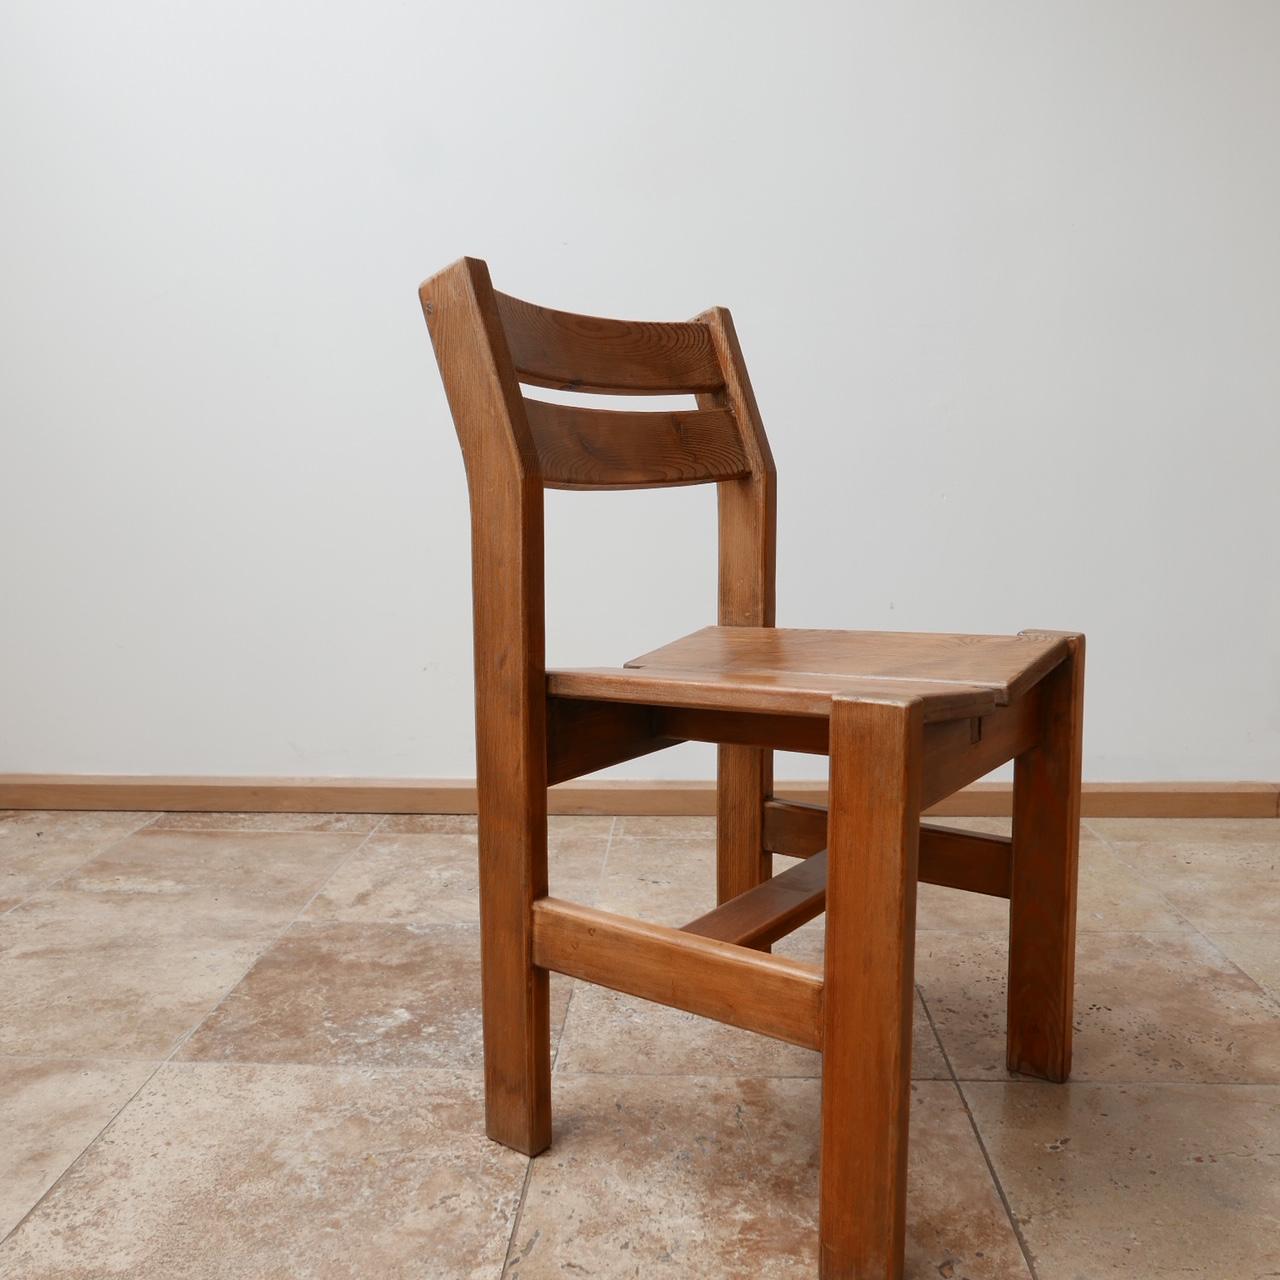 A set of unusual well formed dining chairs,

Designed for Les Arcs La Cascade Residence.

Unknown maker but in the manner of Pierre Chapo or Maison Regain.

The seats are slanted slightly but remain comfy and stylish.

French,